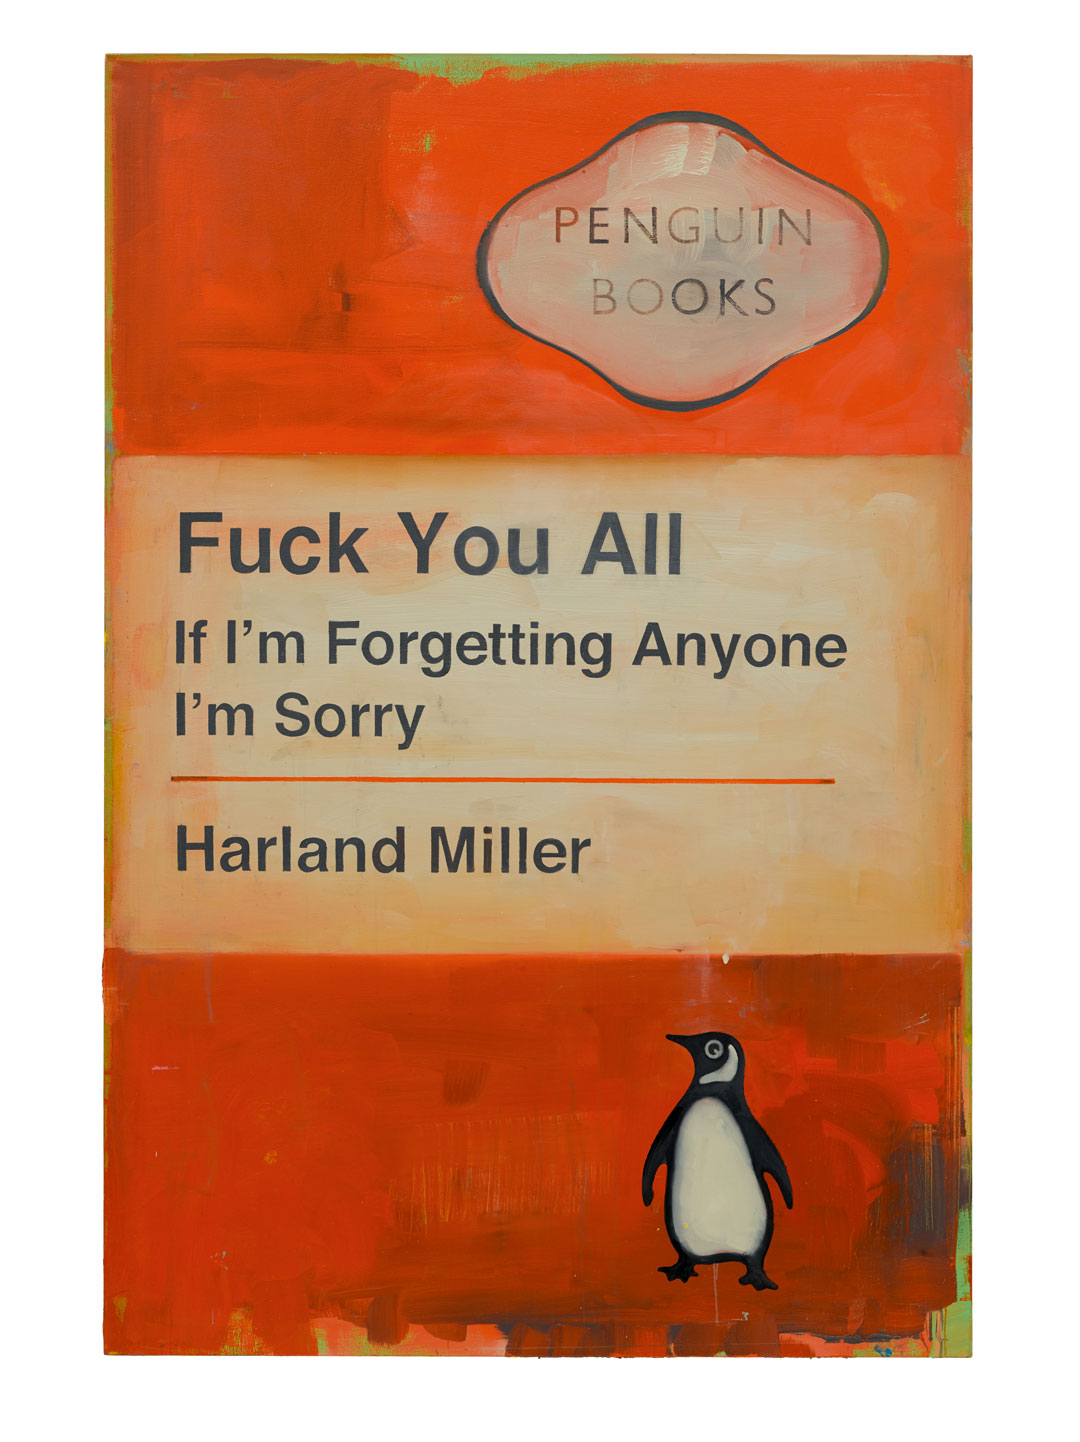 Fuck You All, 2015, oil on canvas, 234 × 156 cm (92 1/8 × 61 7/16 in). © Harland Miller